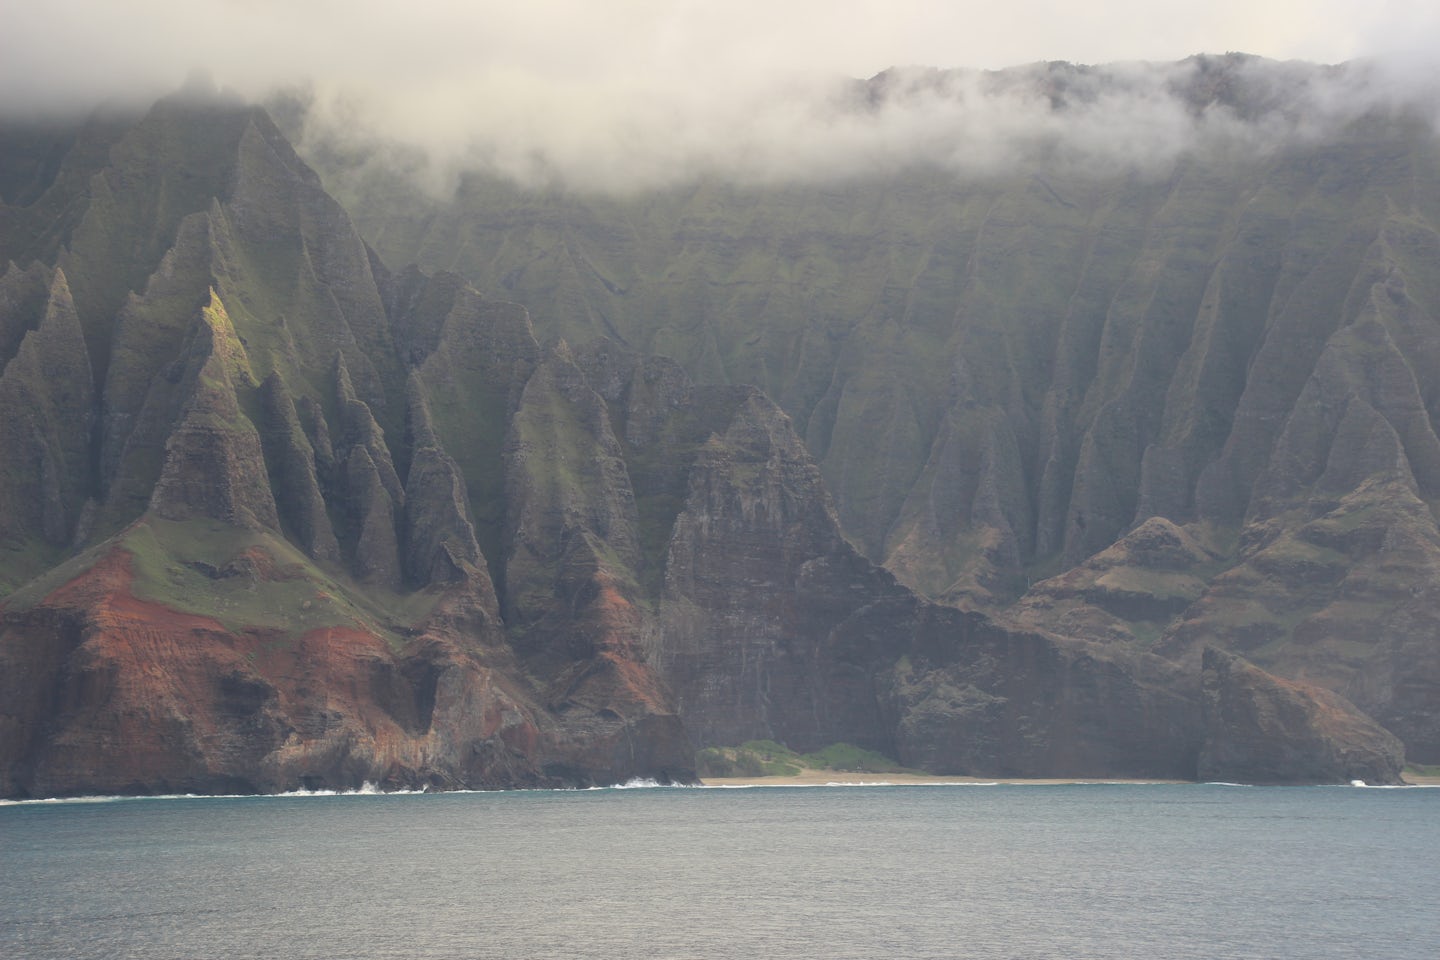 Napoli Coast of Kauai .,. a special ship excursion to the NE side of the is